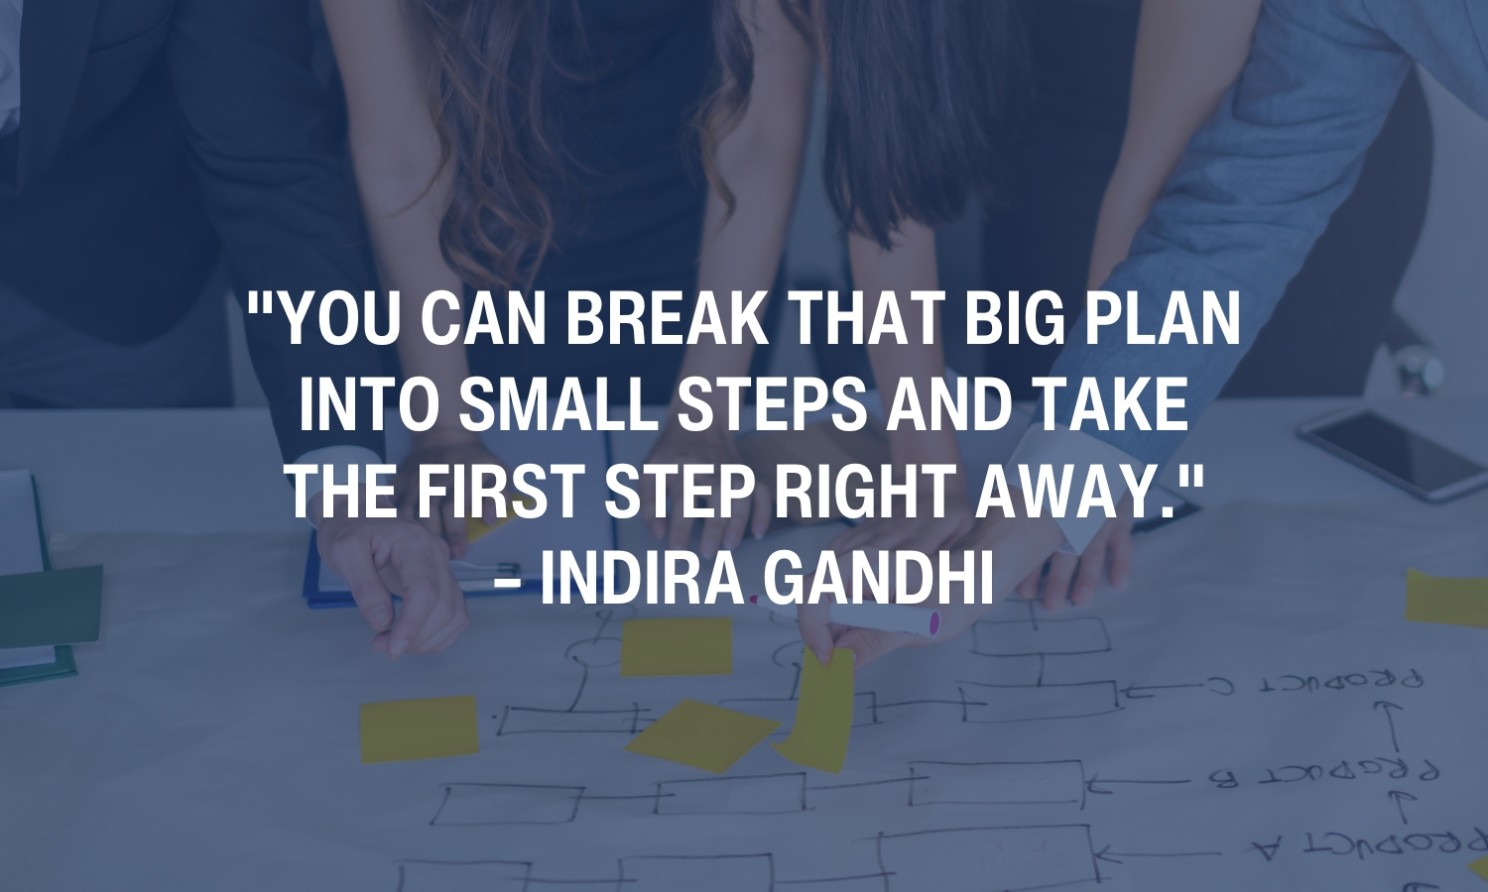 In the background, there's a group of hands with post-it notes and a poster making a plan. There's a navy blue filter over the image. On top, there's a quote that states: "You can break that big plan into small steps and take the first step right away." – Indira Gandhi